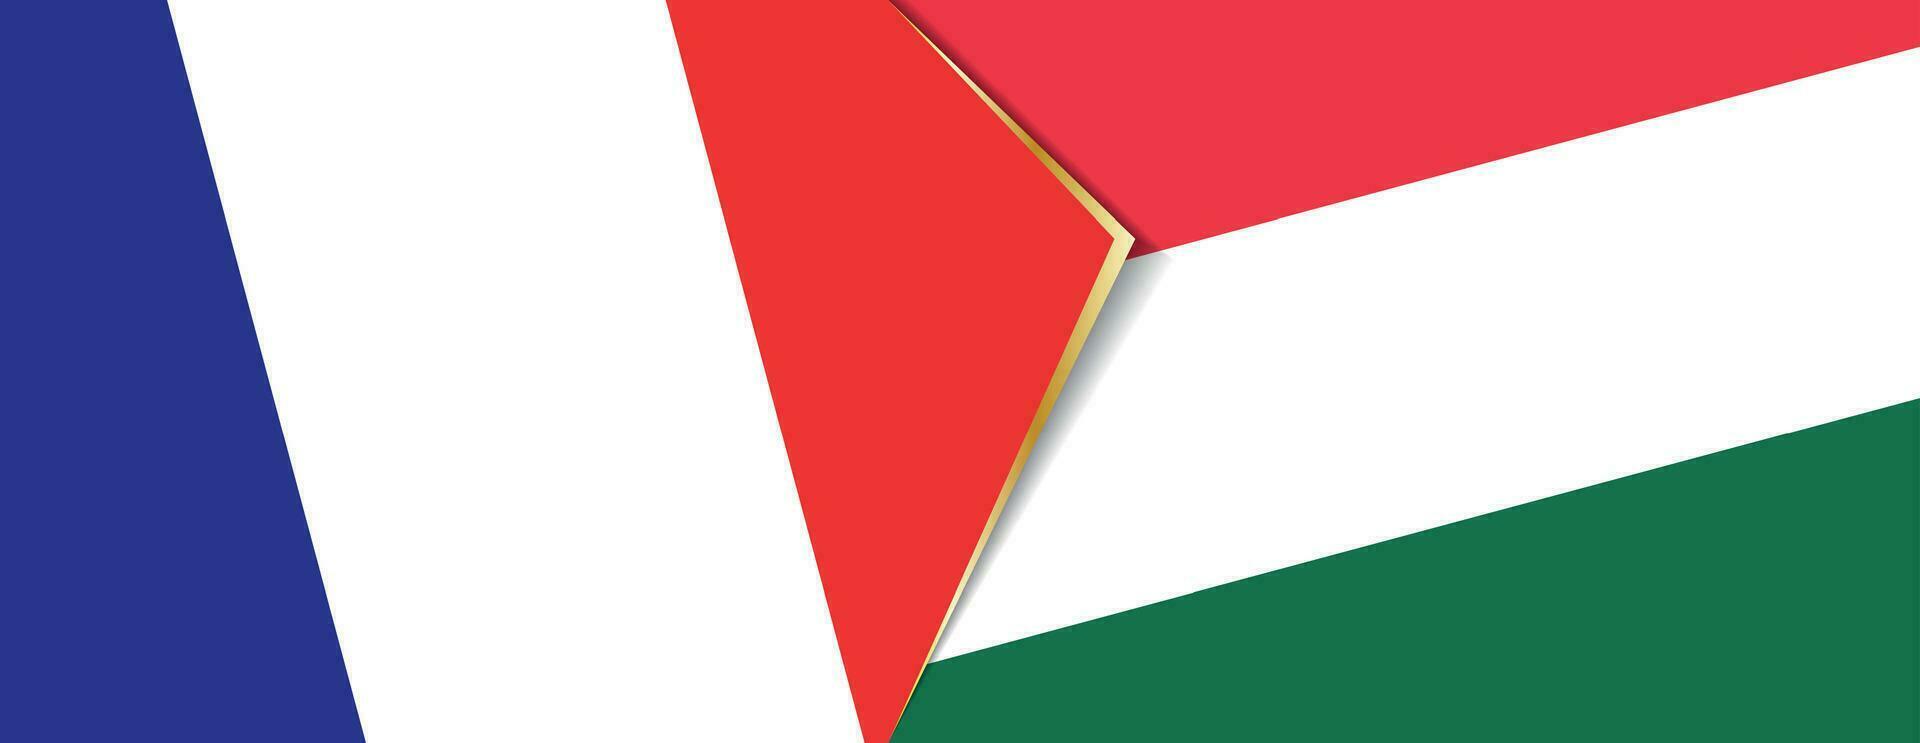 France and Hungary flags, two vector flags.